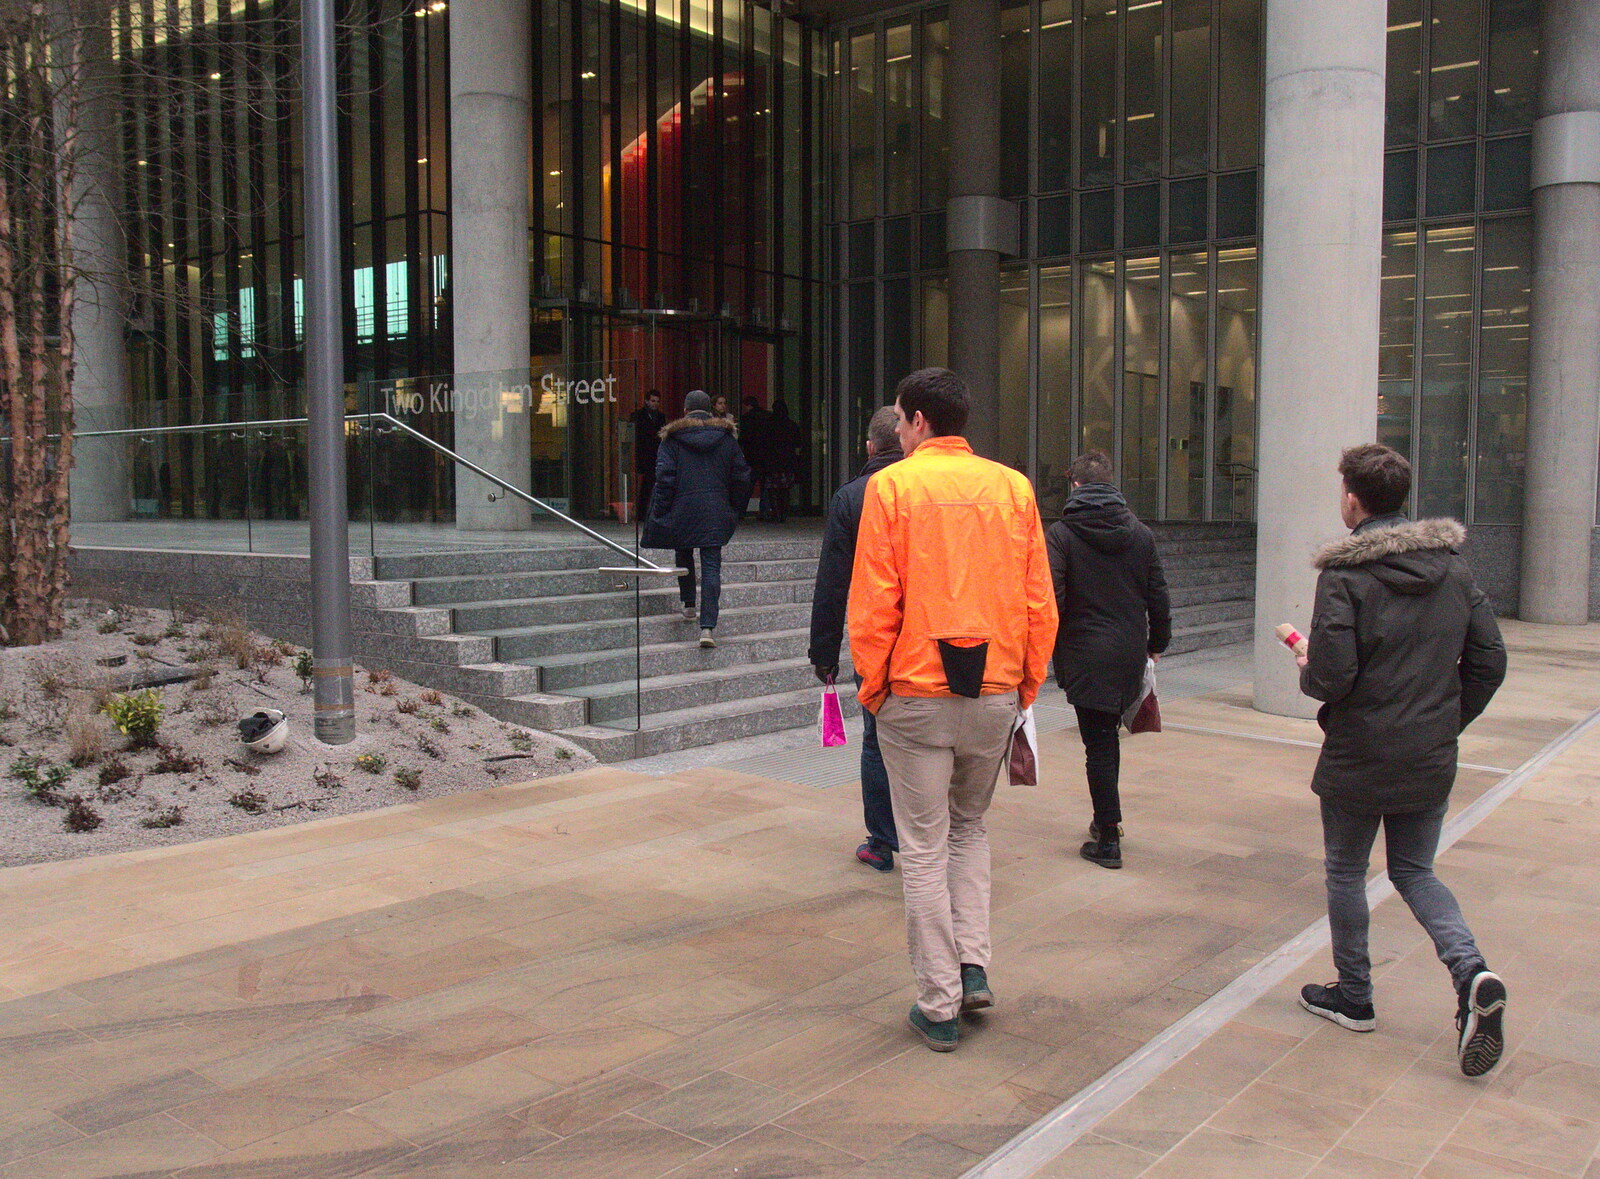 The steps of Two Kingdom Street from Grandad's Fire and SwiftKey Moves Offices, Eye and Paddington - 23rd January 2017